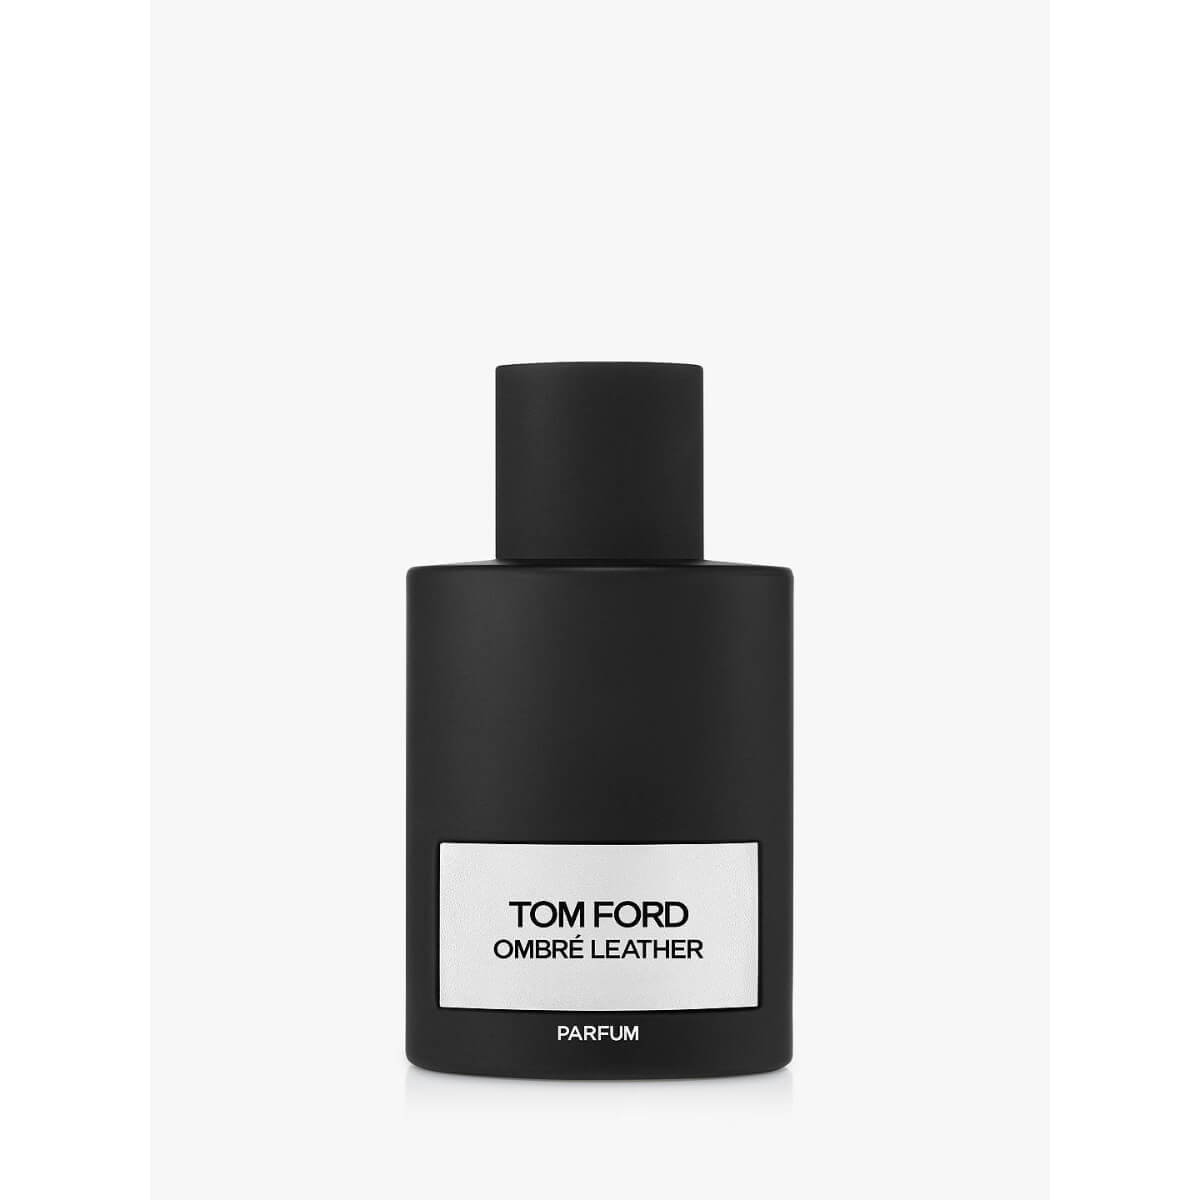 Tom Ford Ombre Leather Parfum 100ML